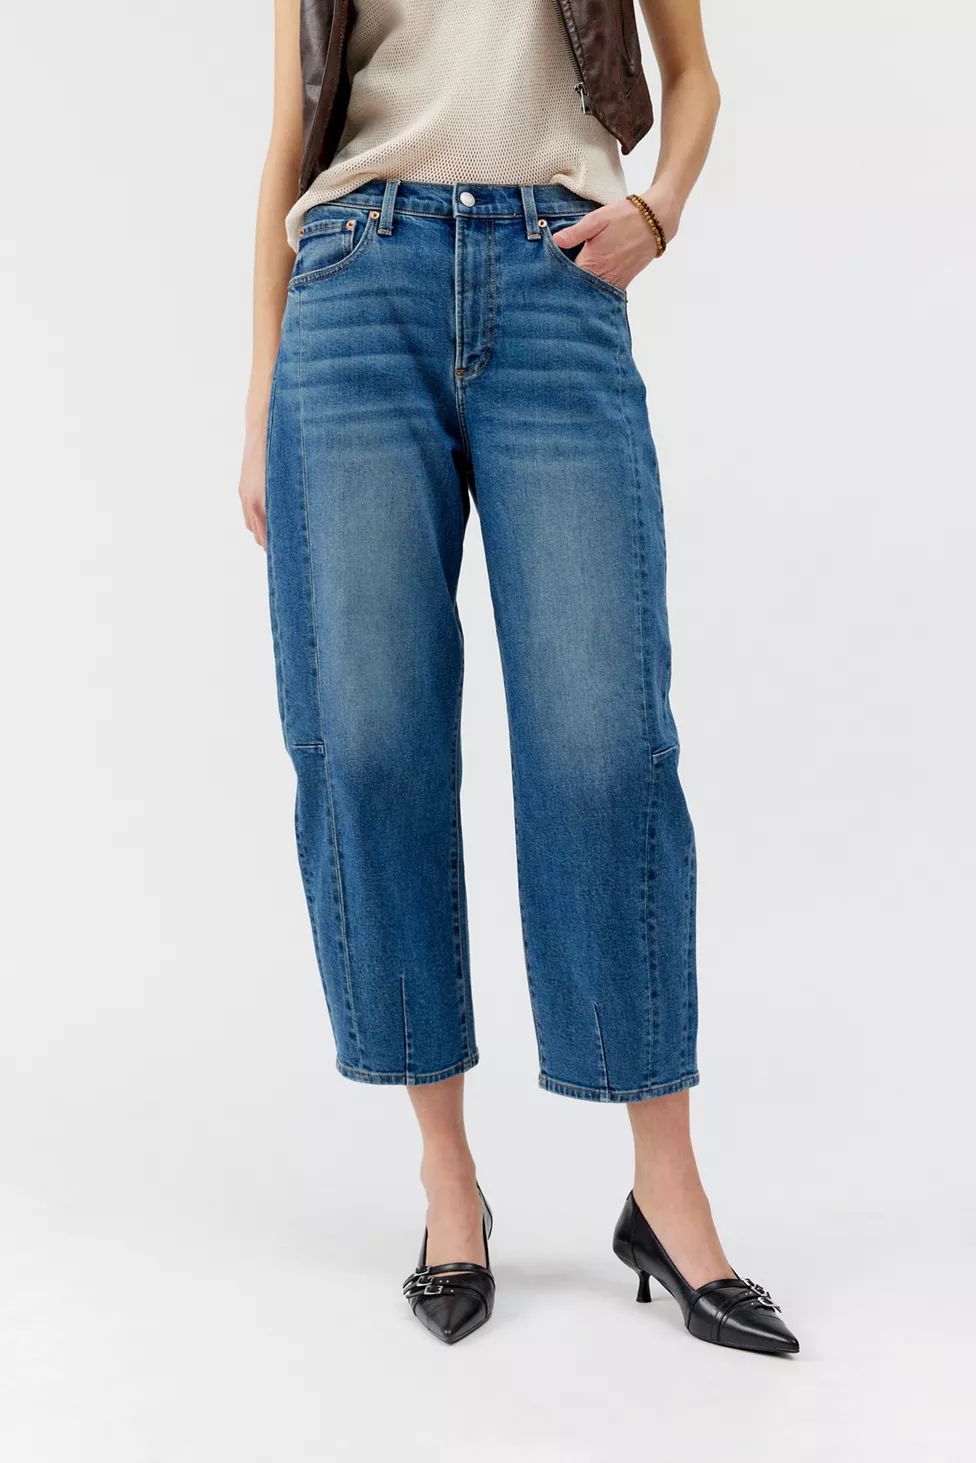 Pistola Eli High-Waisted Arched Leg Jean | Urban Outfitters (US and RoW)